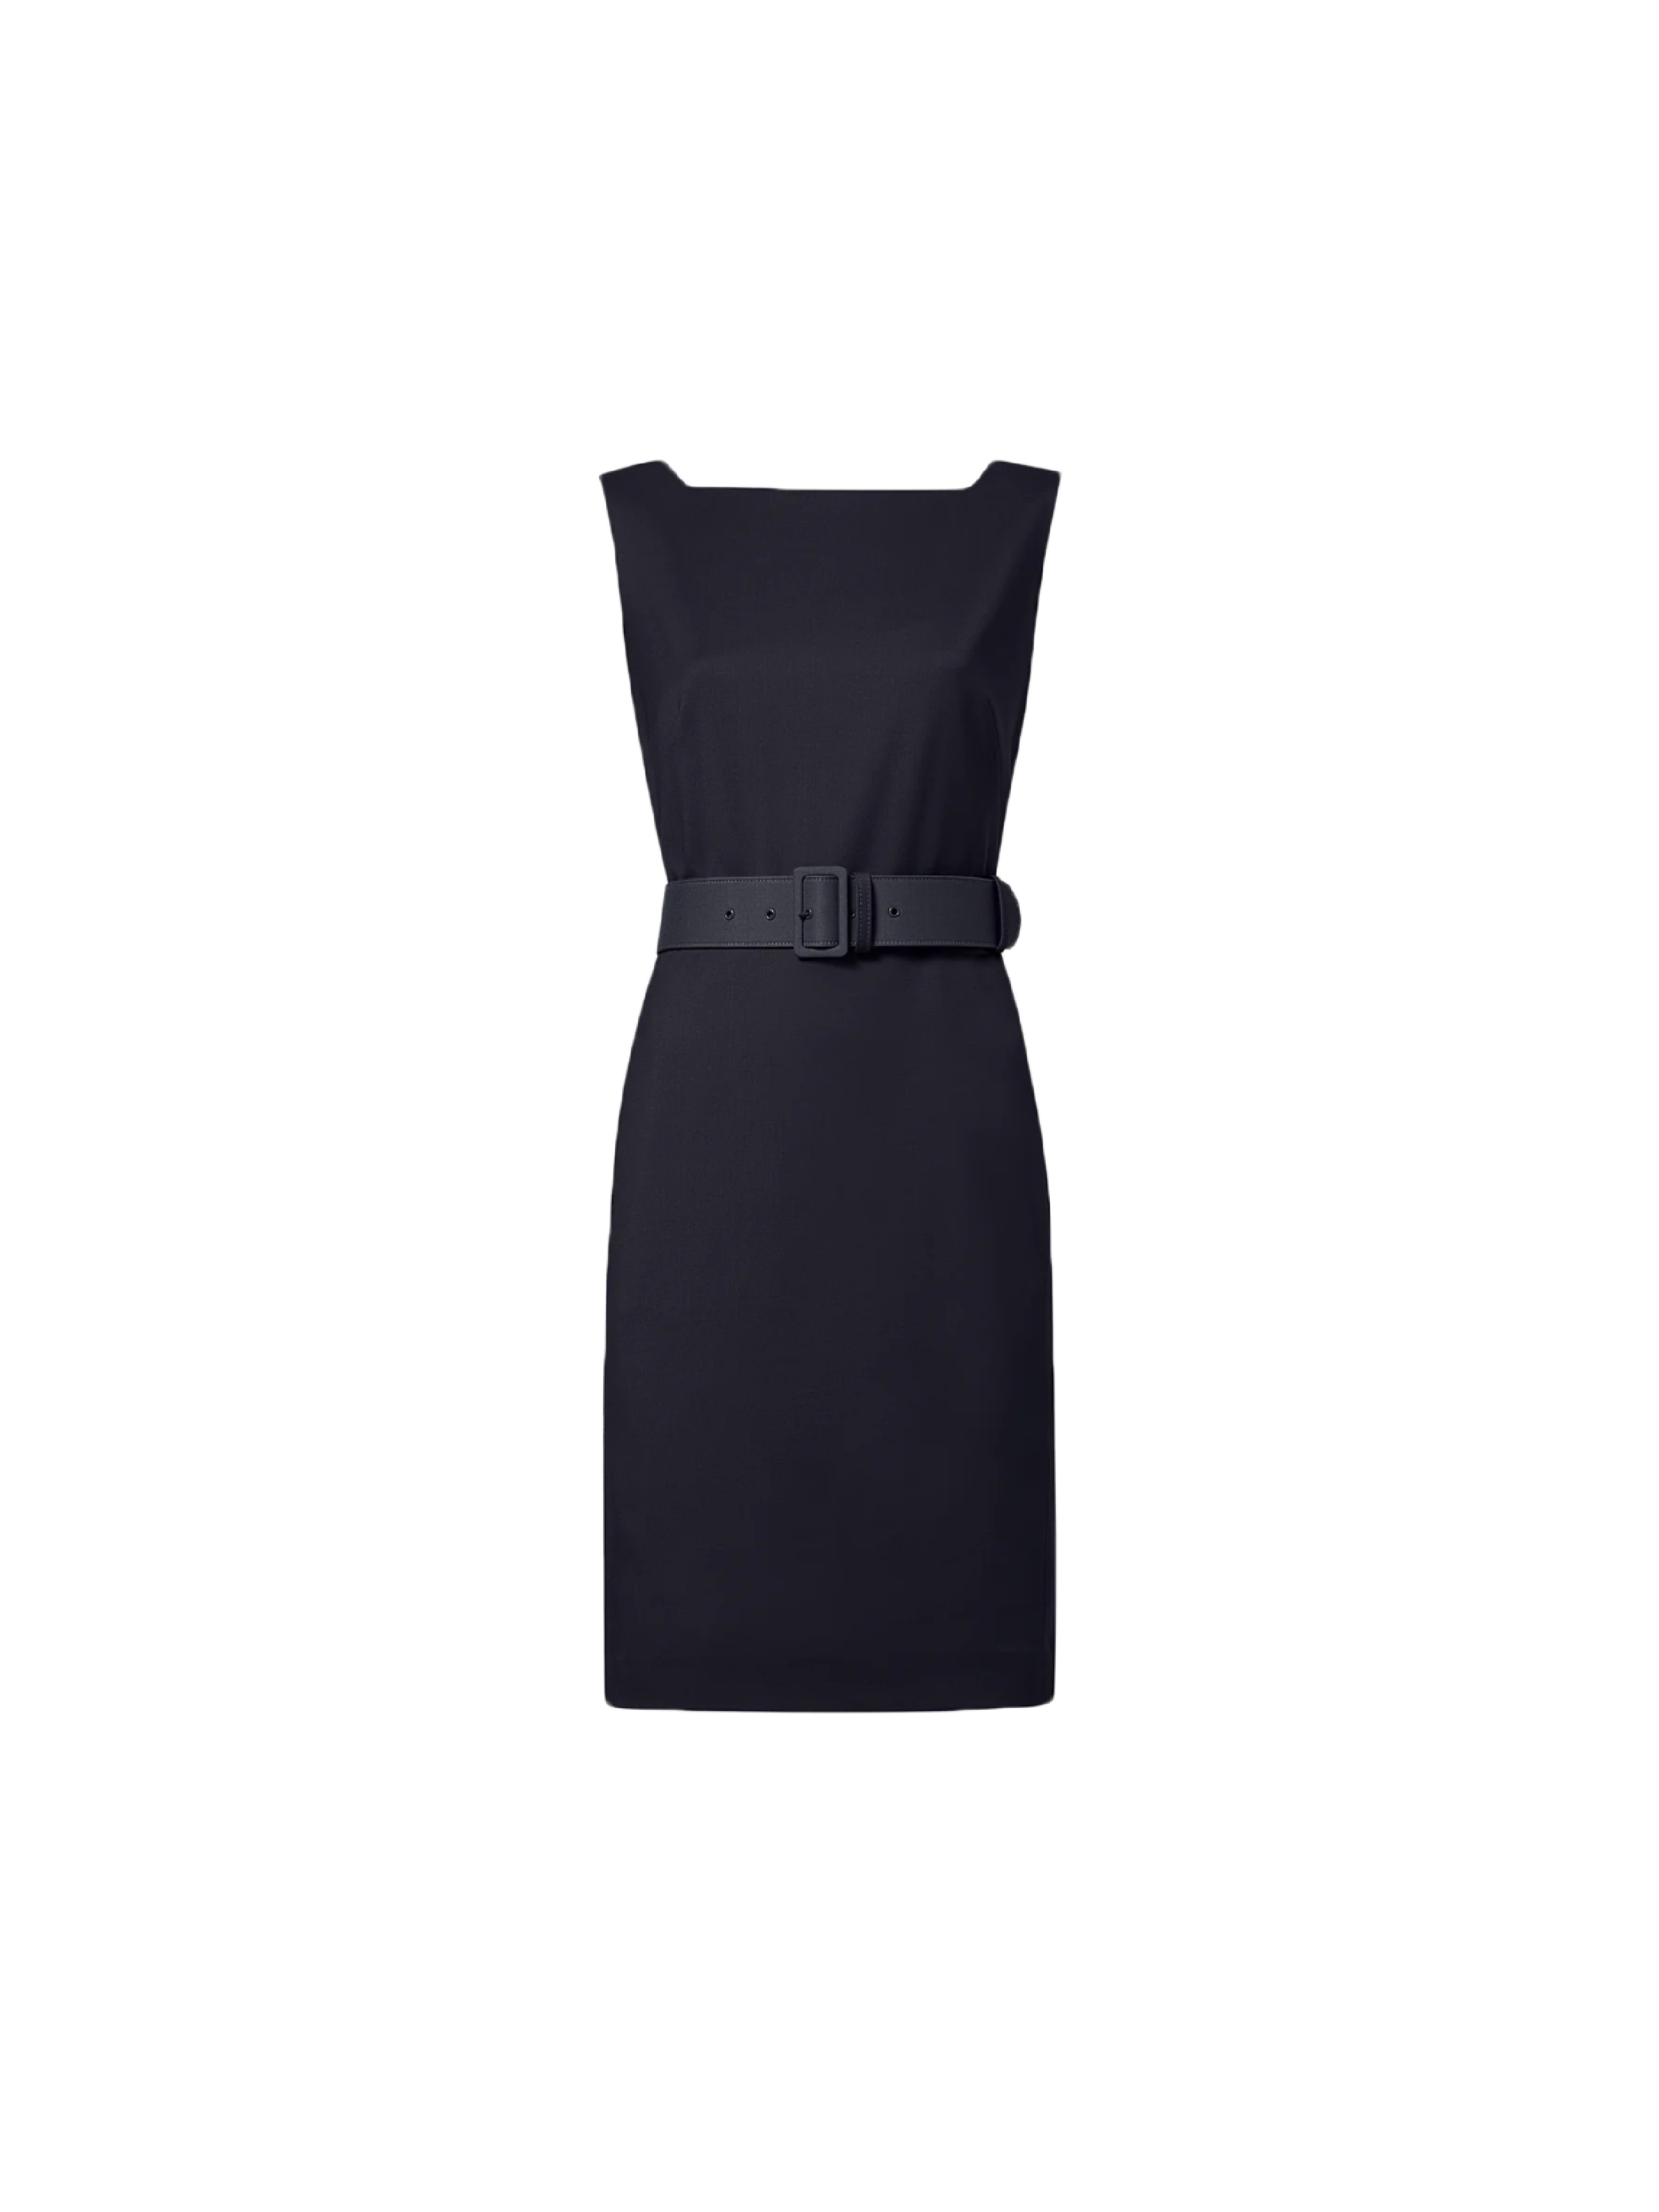 belted dress-01.png